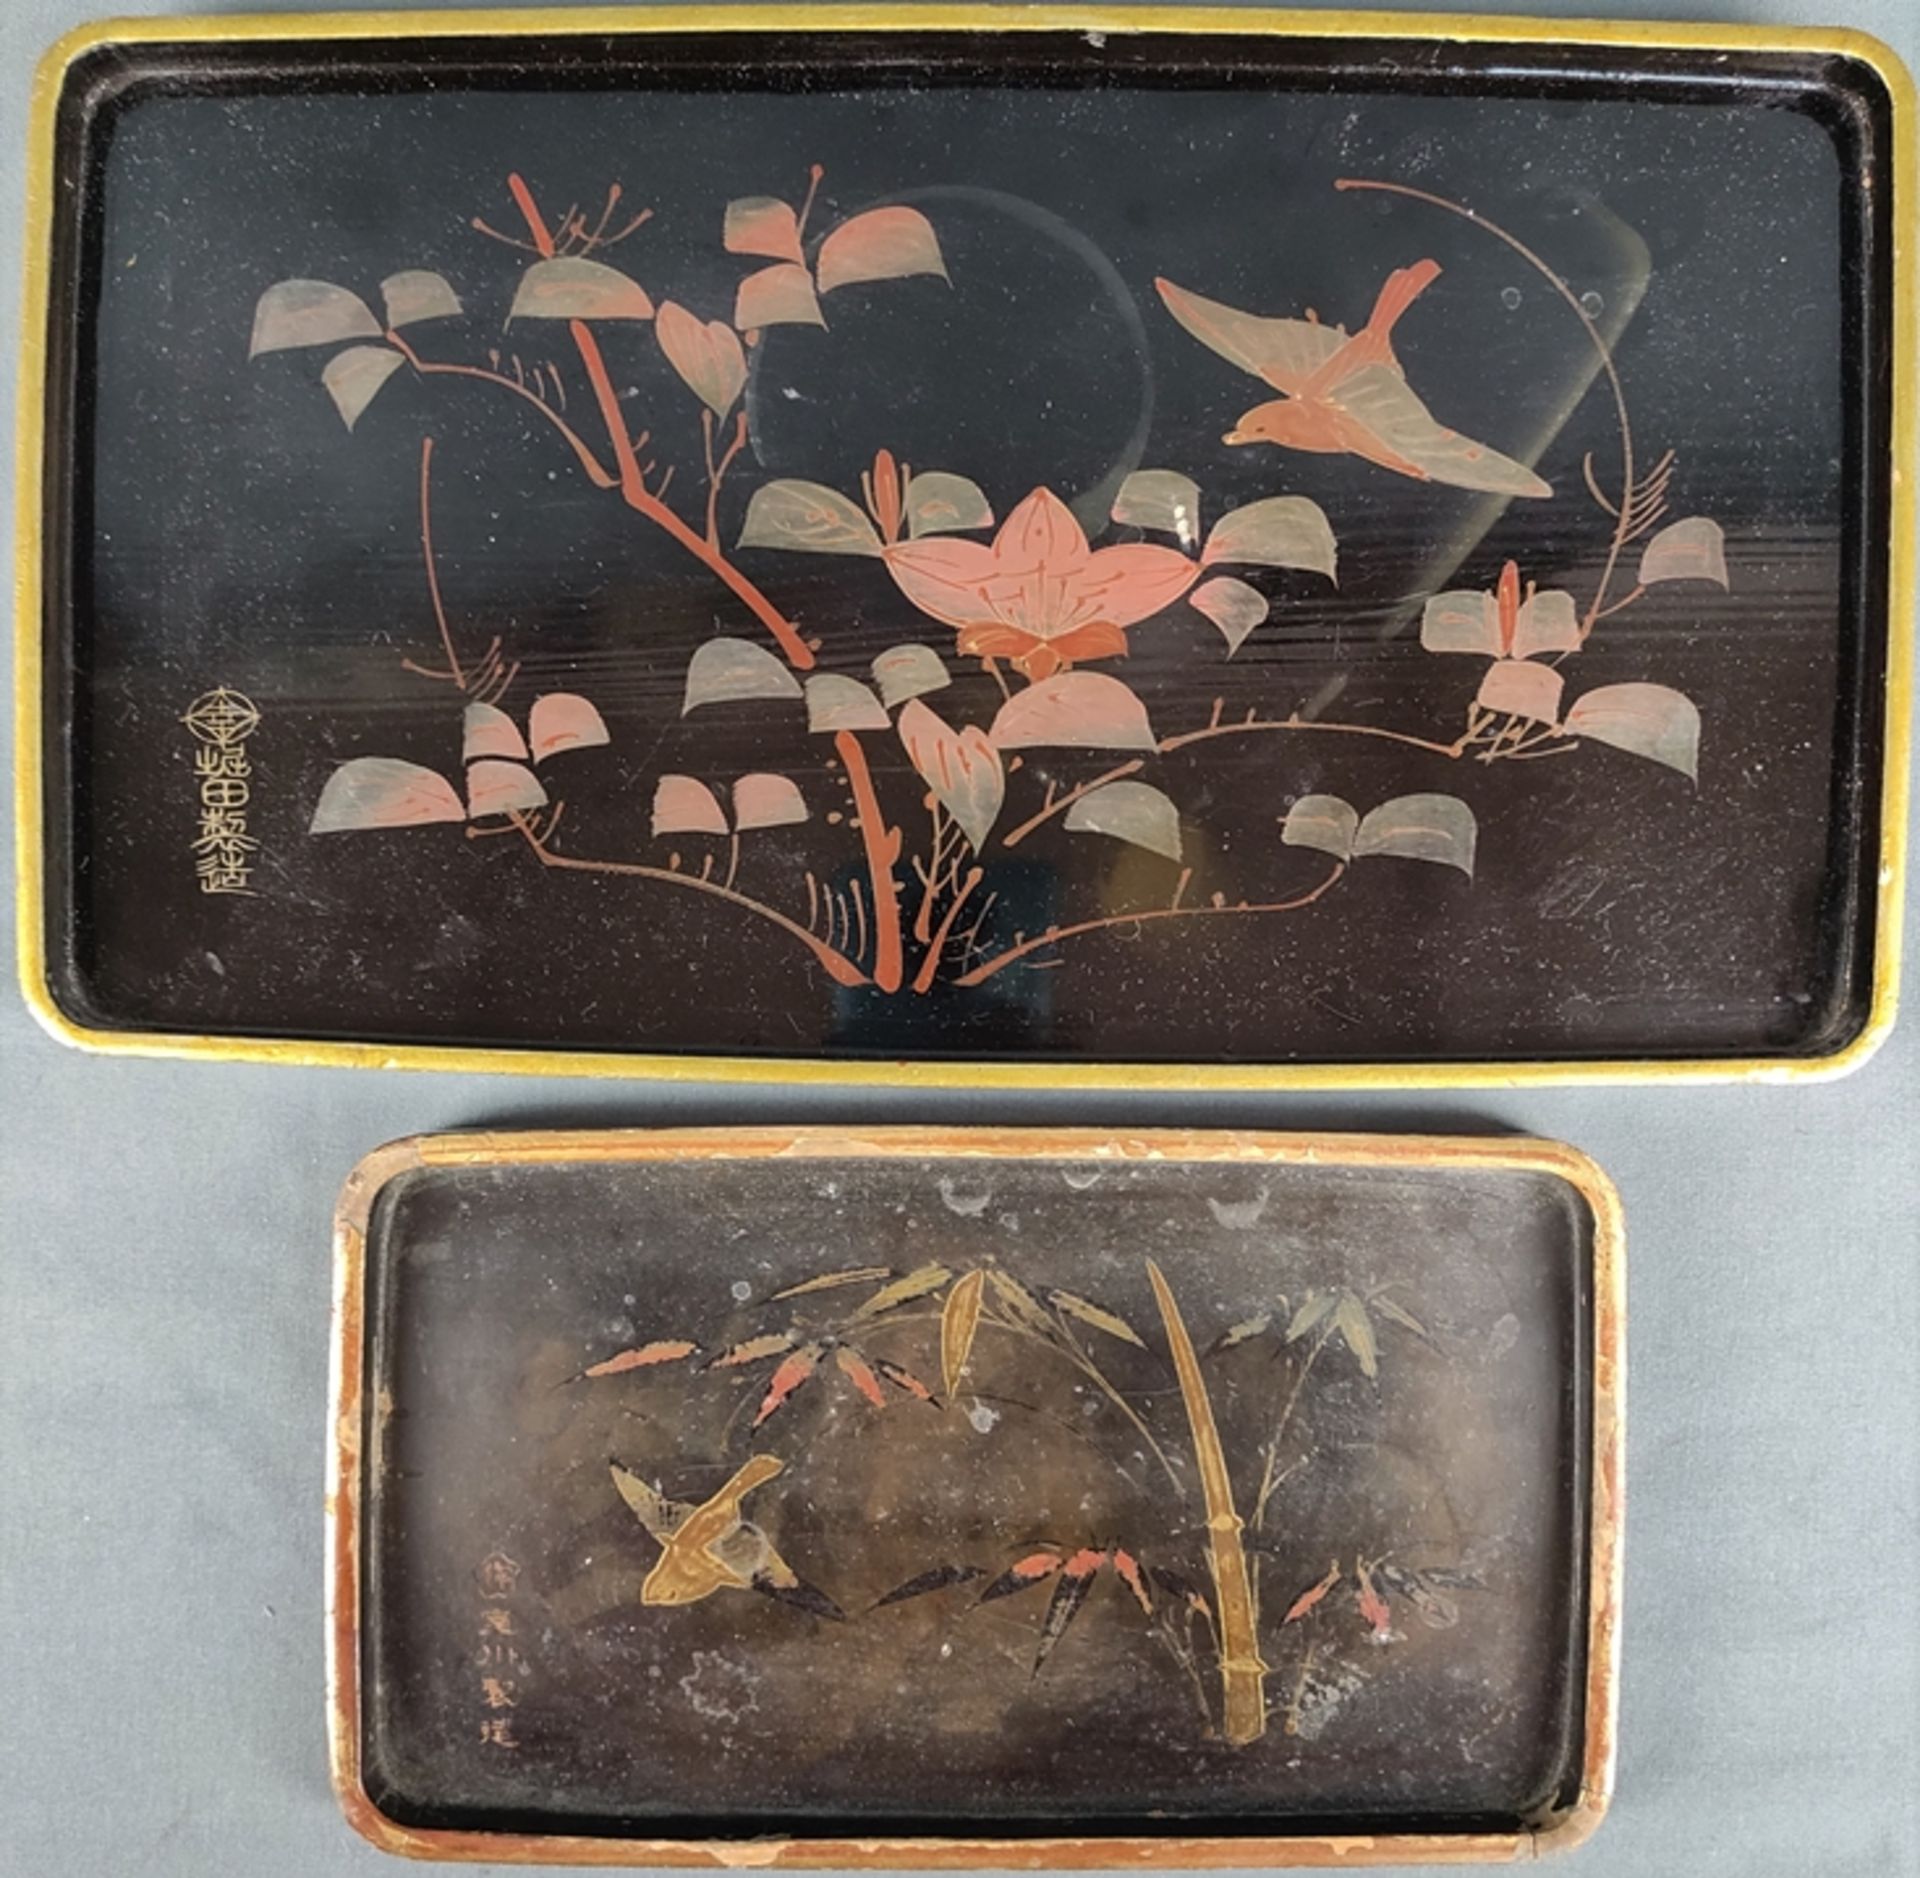 Two lacquer trays, black lacquer decorated with polychrome floral motives and bird, gold rims, each